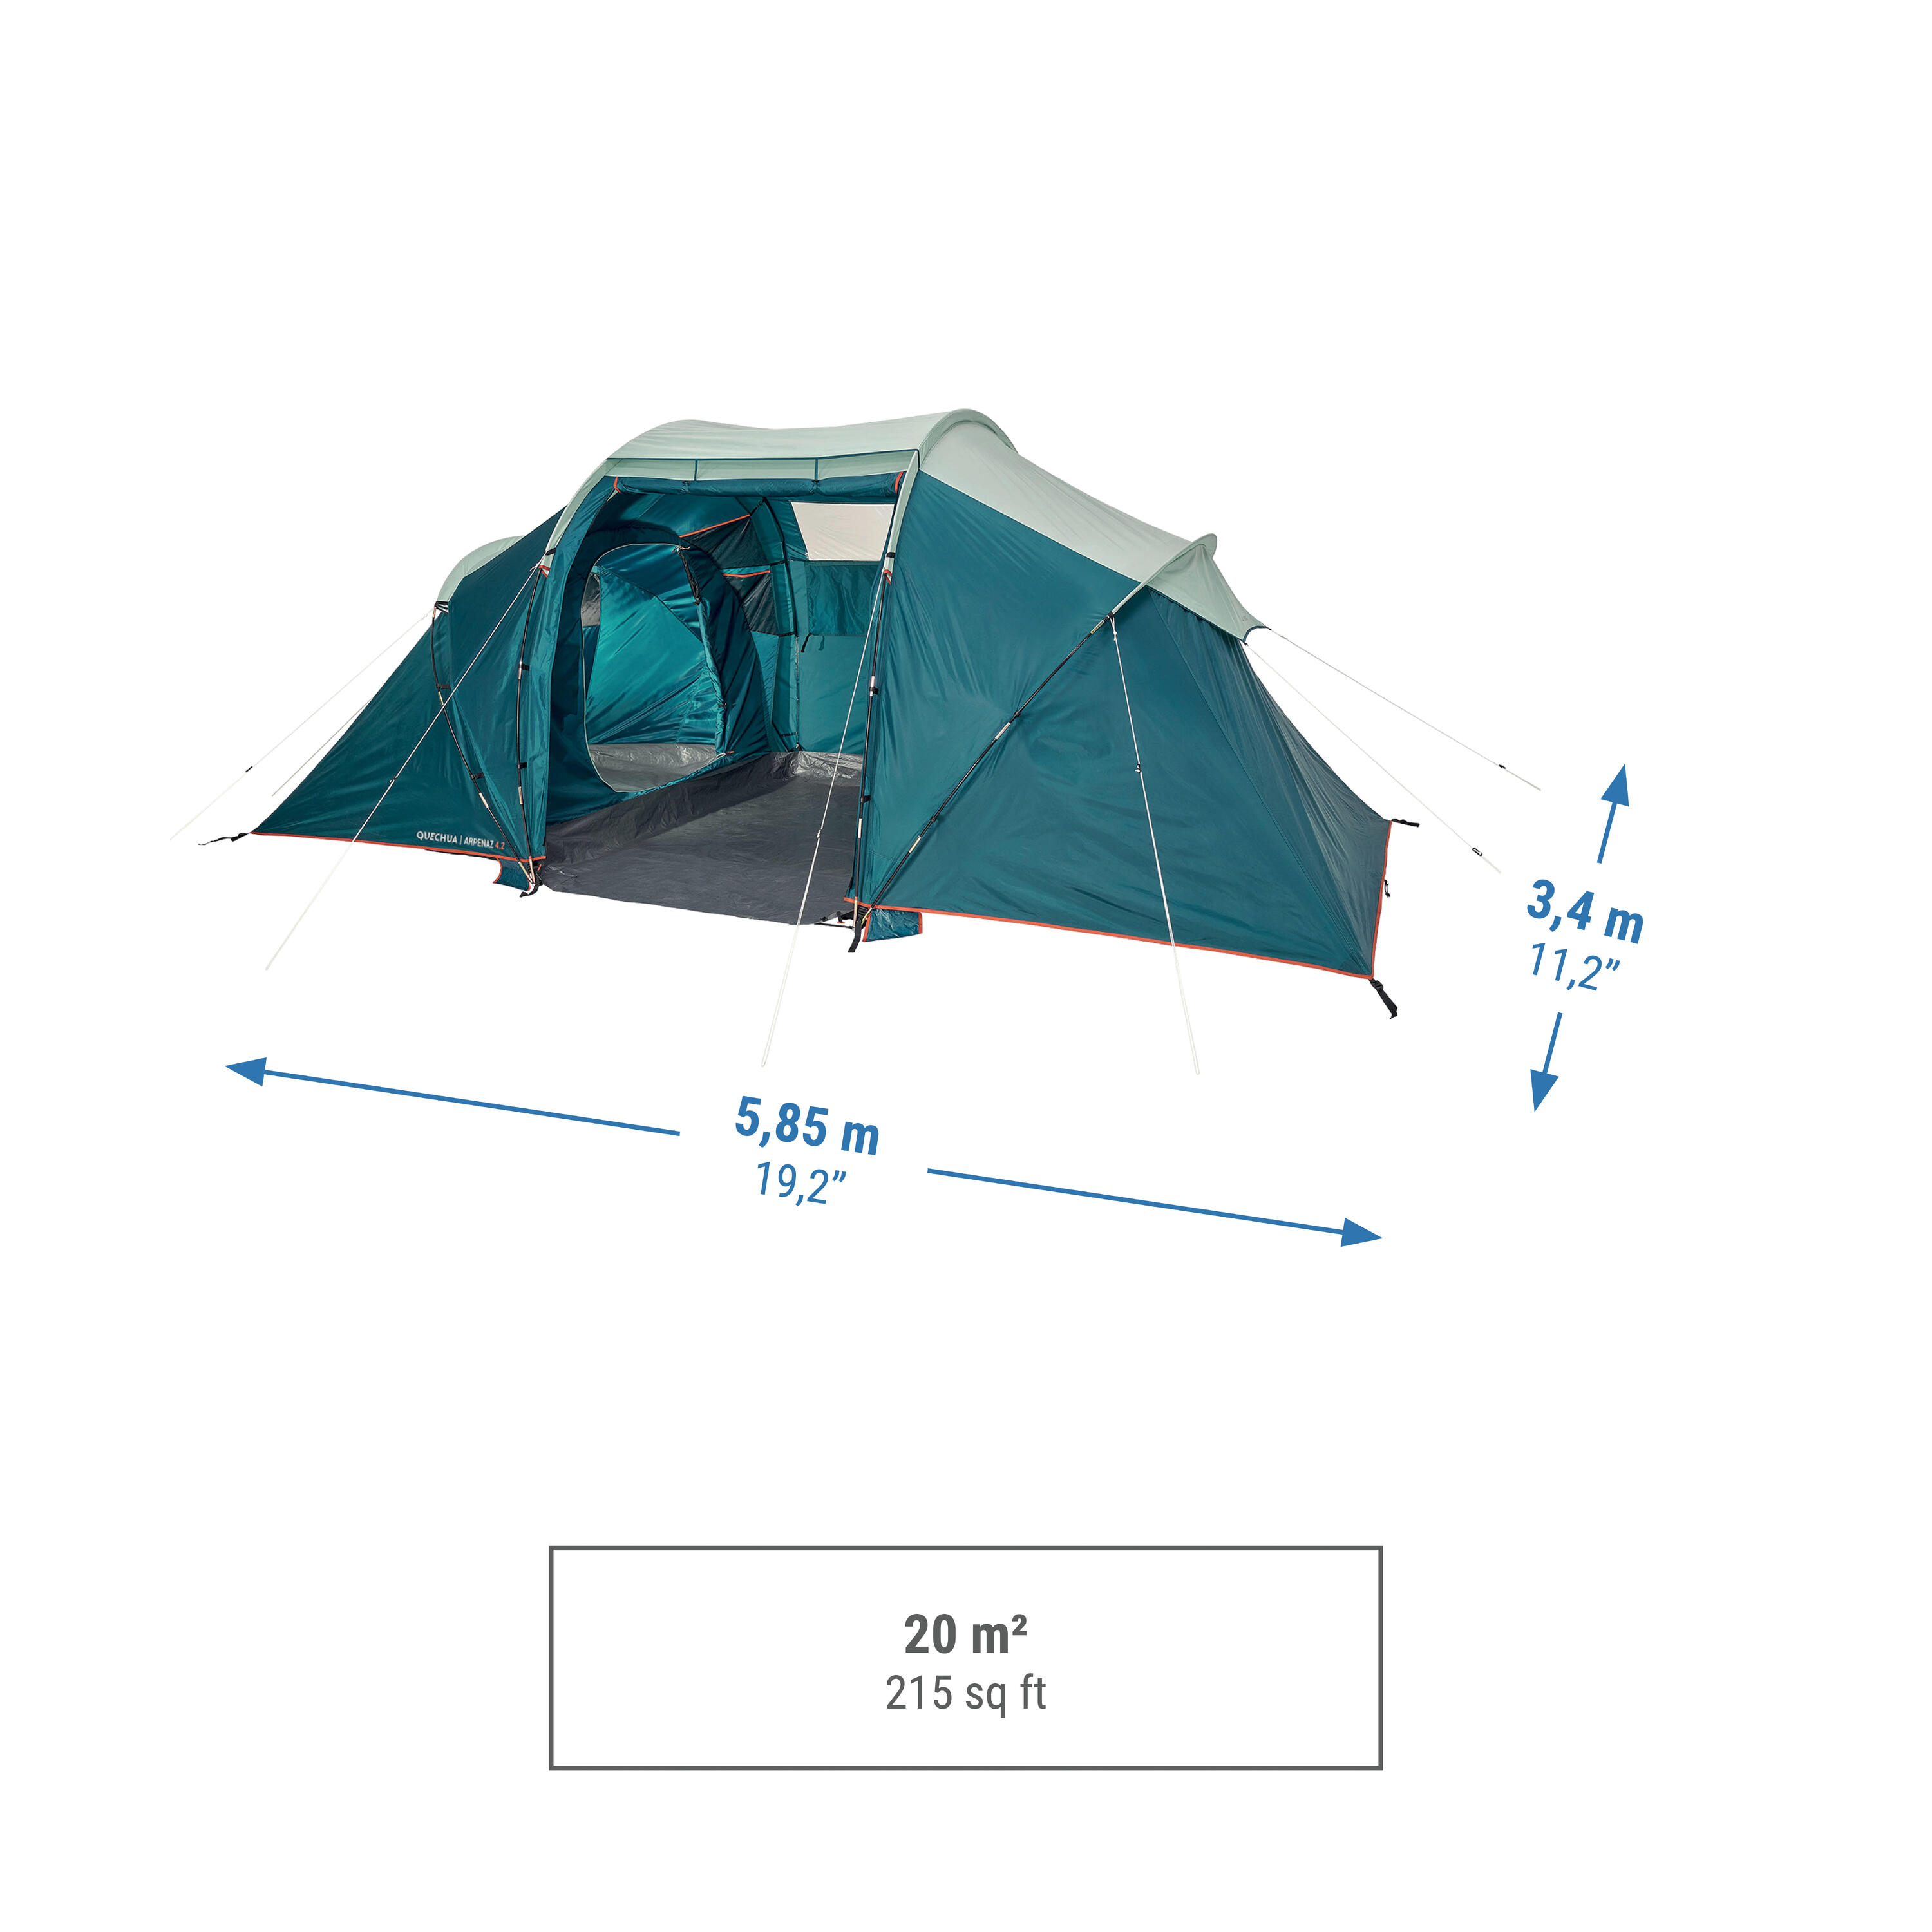 Camping Tent with Poles Arpenaz 4.2 4 People 2 Bedrooms 4/20